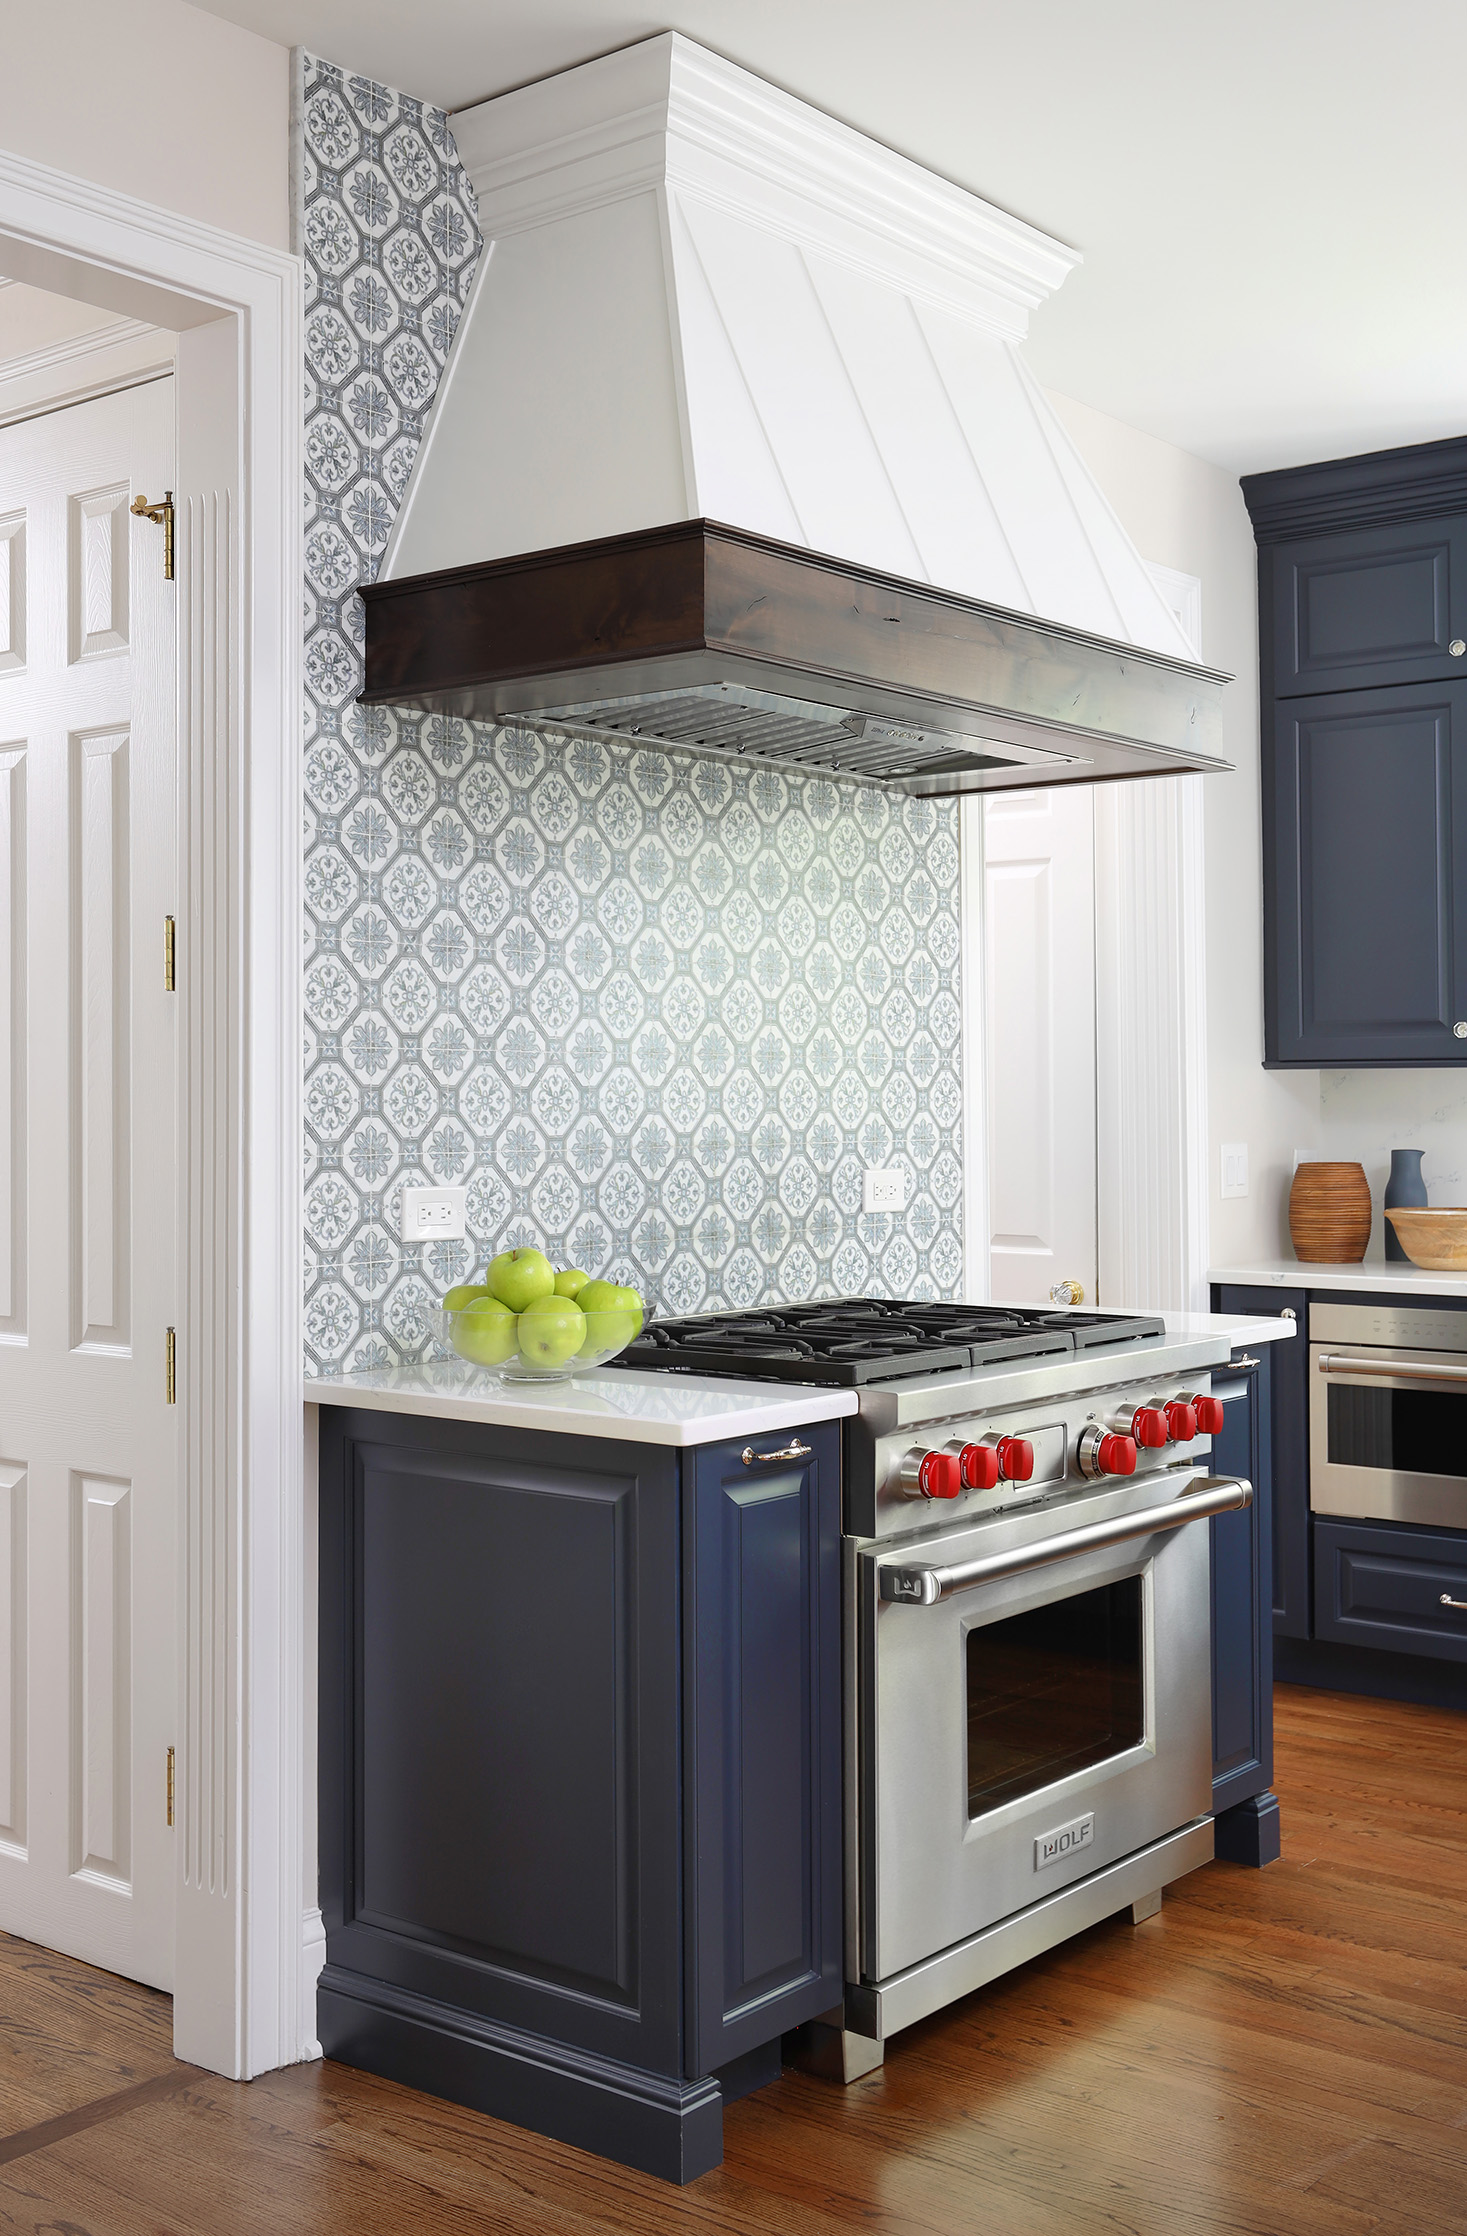 Blue kitchen cabinets with pattern backsplash tile and wood accent hood